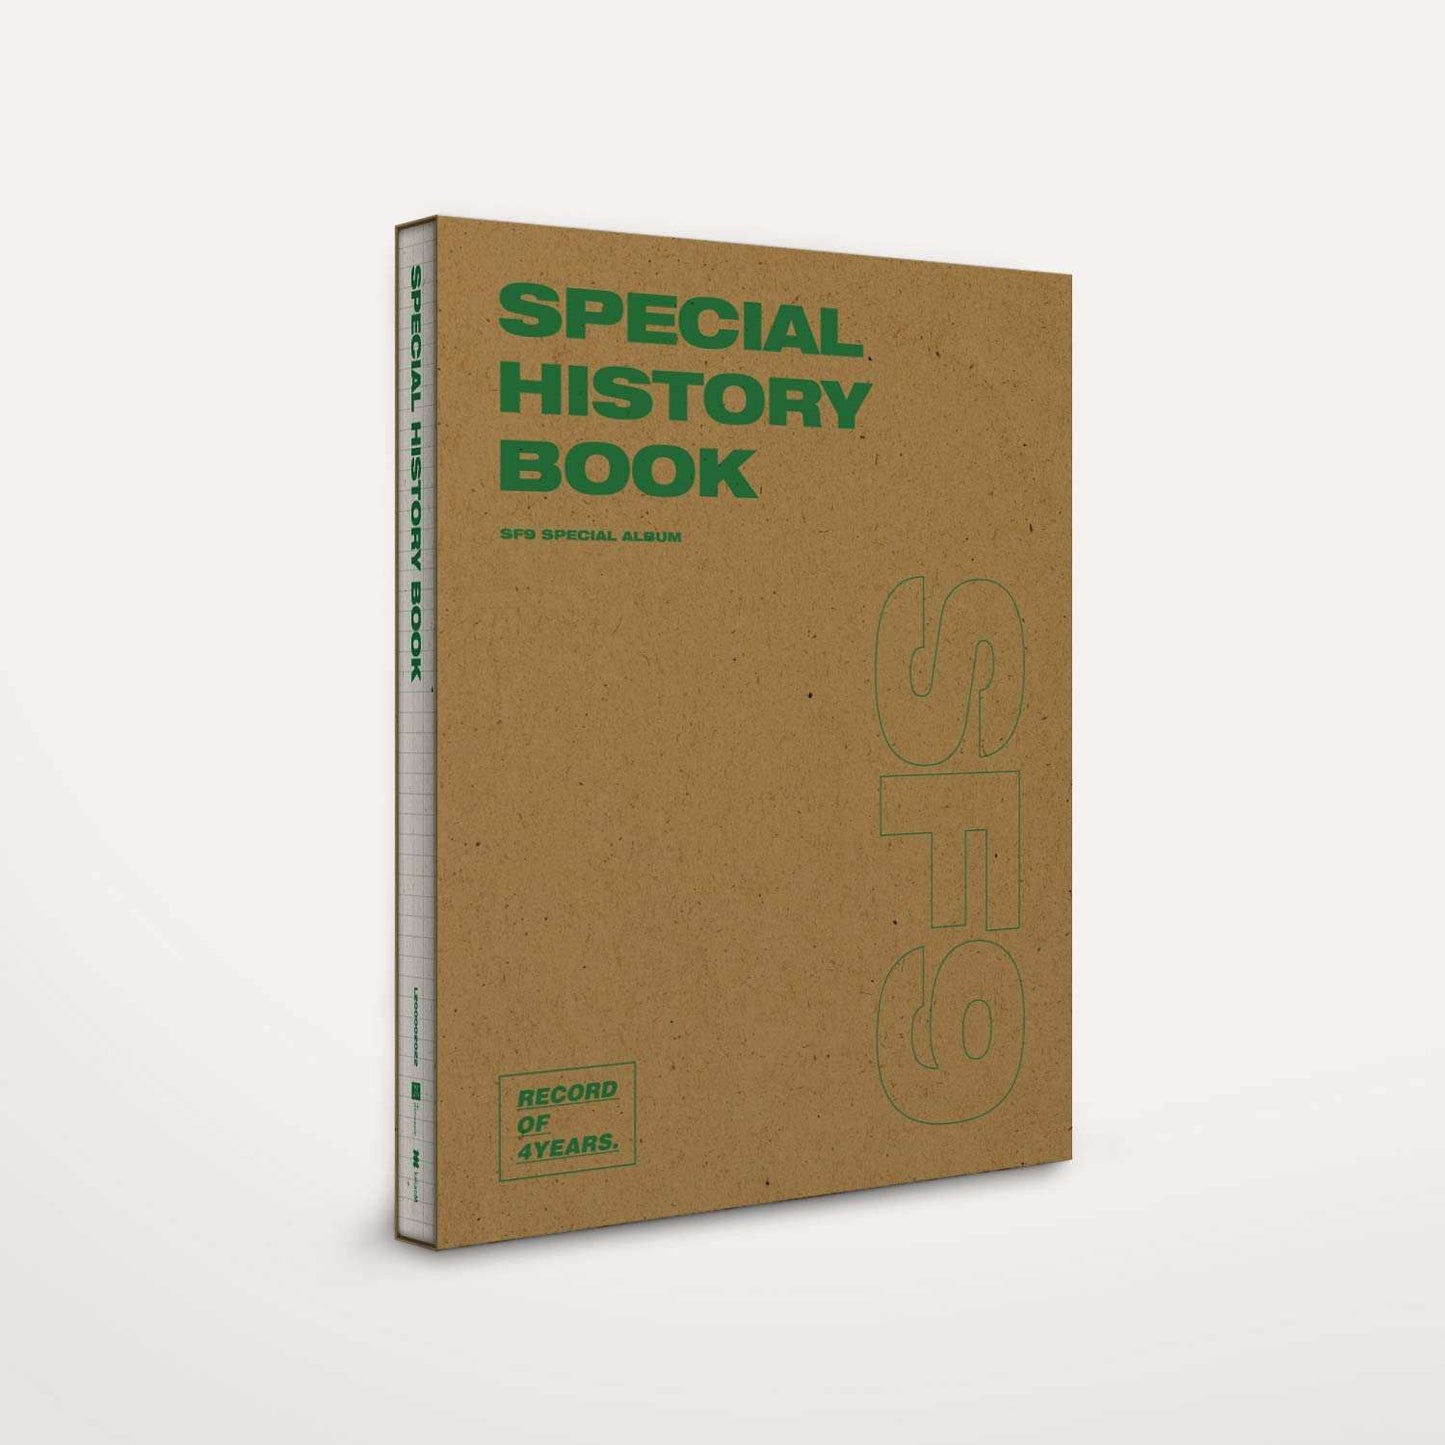 Includes 128 page photobook + photo card